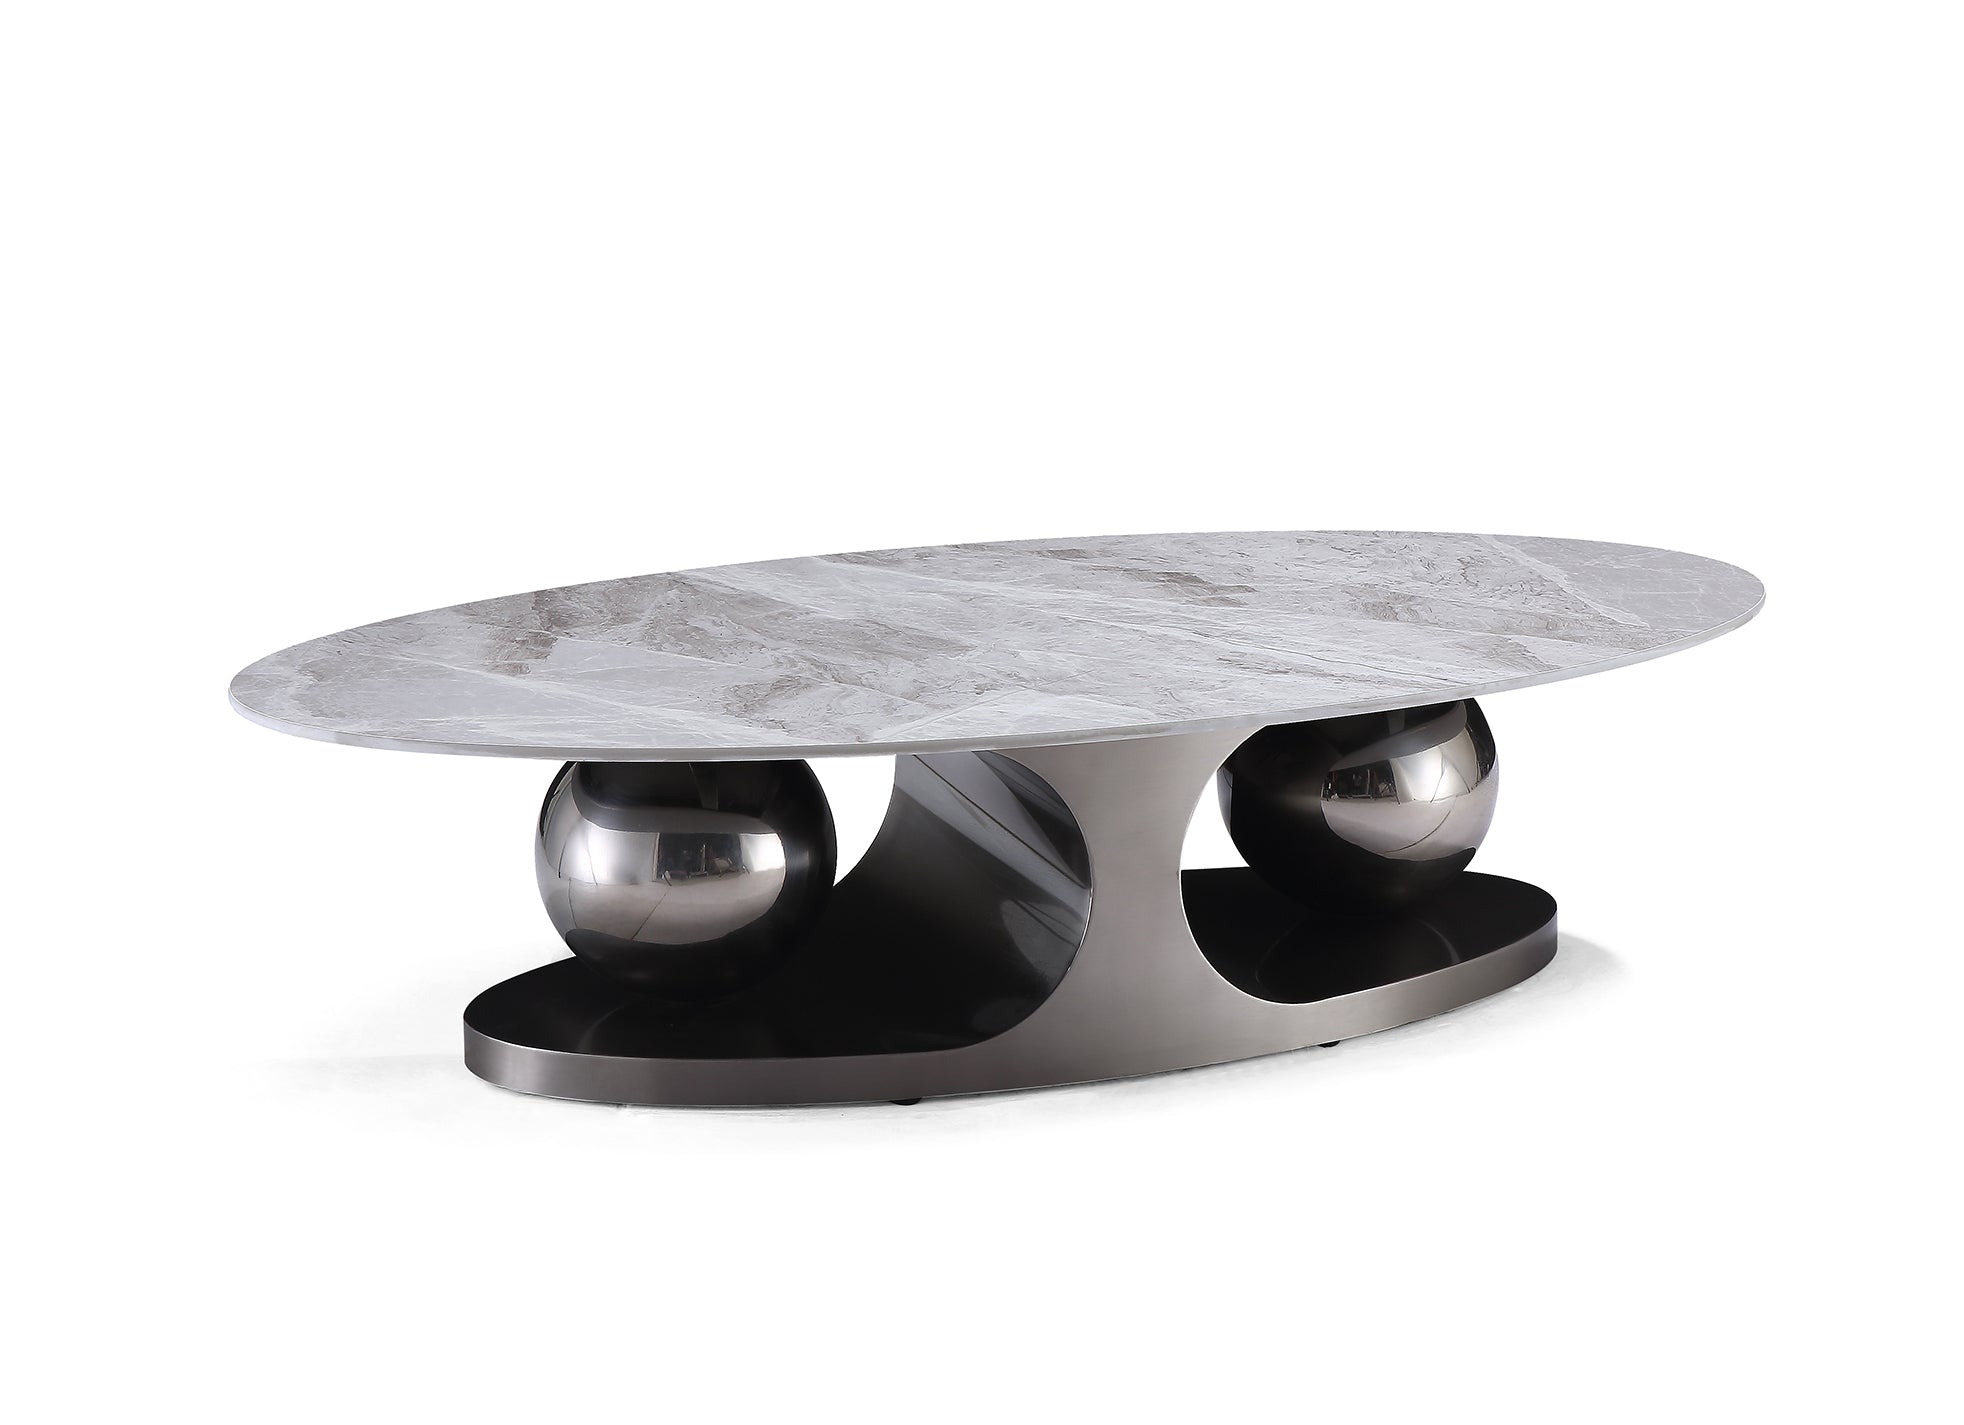 Liberty Center Table With Marble Top And Metal Base